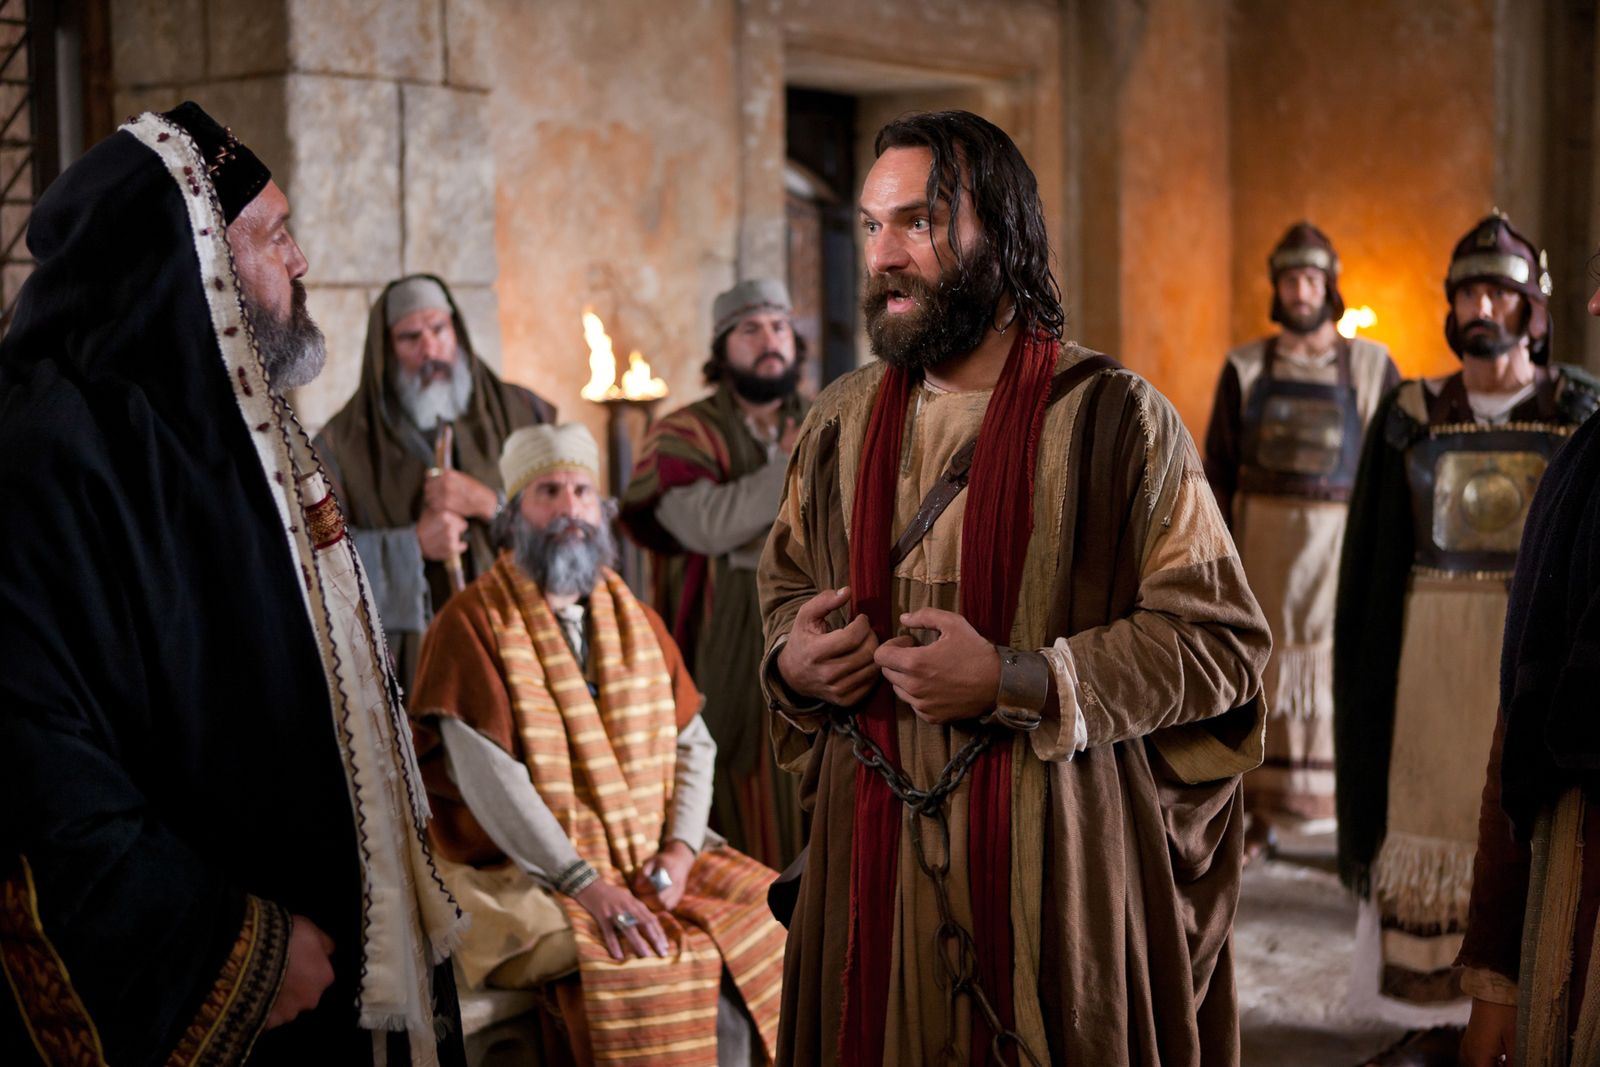 Peter continues to preach in Christ's name even after priests threaten him with punishment.